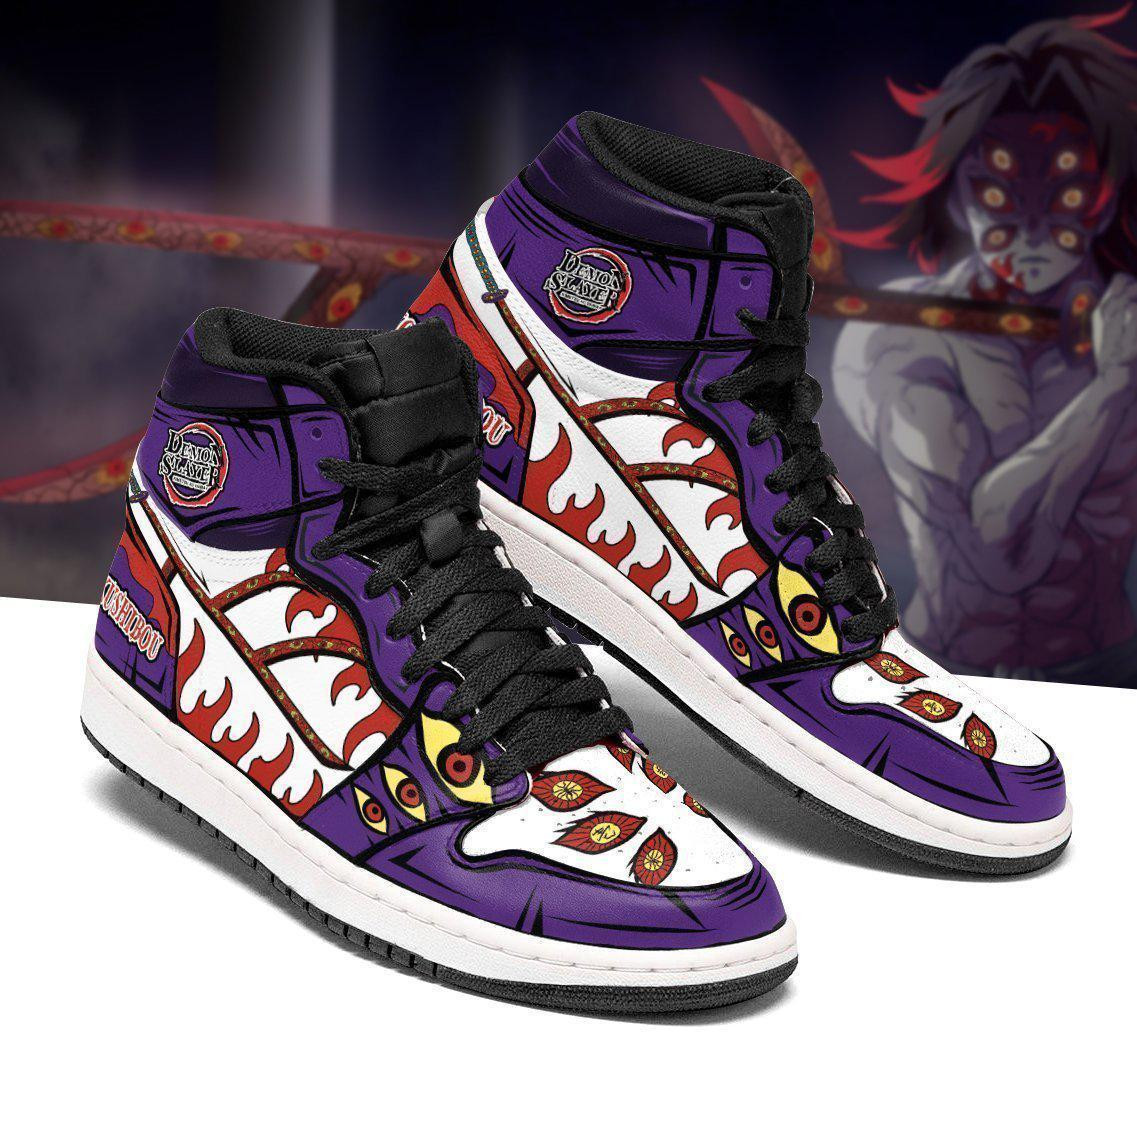 Choose for yourself a custom shoe or are you an Anime fan 12